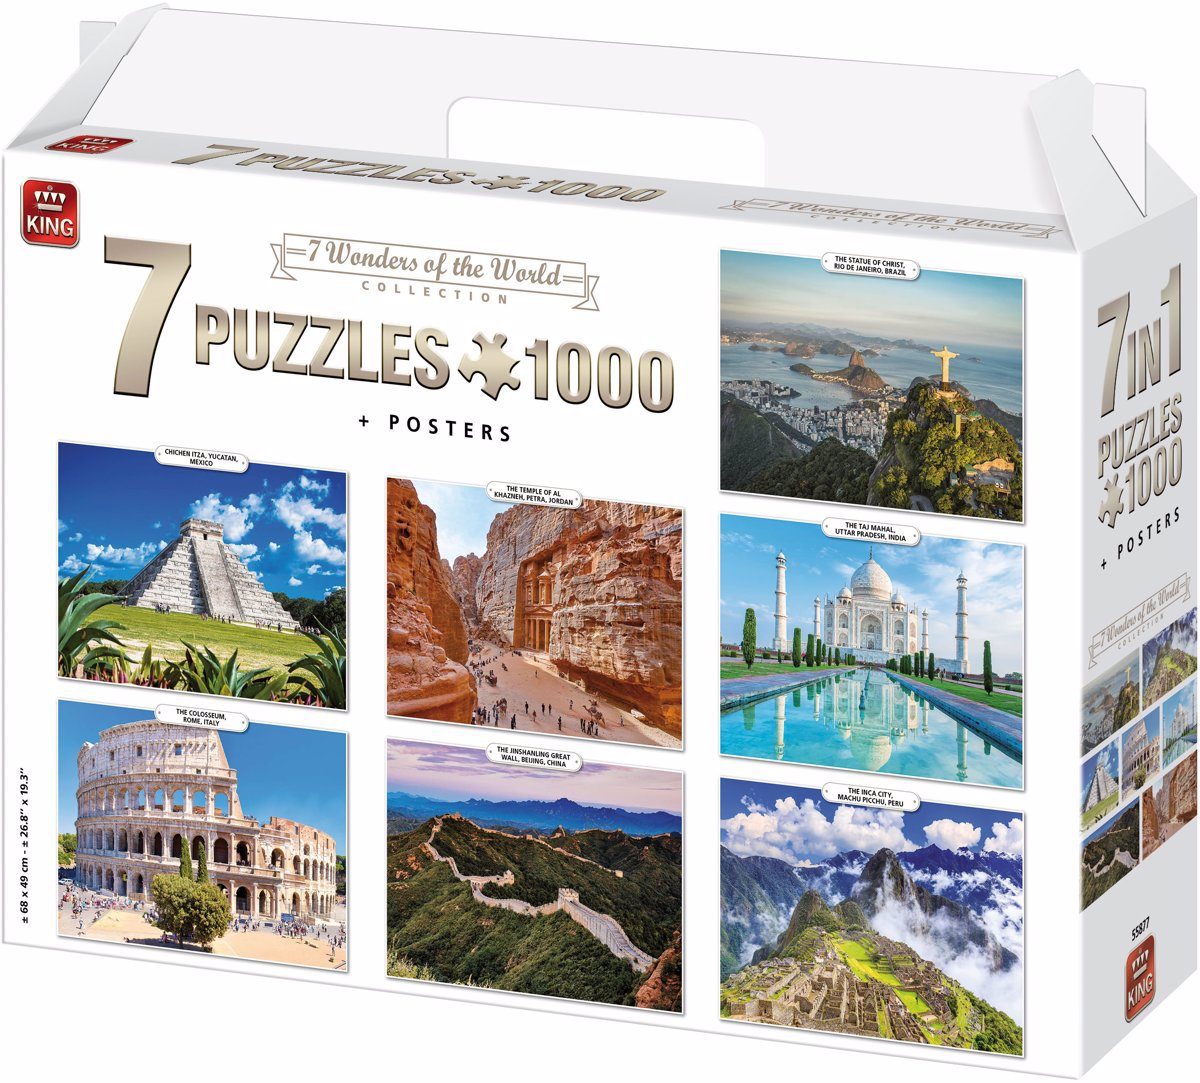 Puzzle 7 Wonders of the World